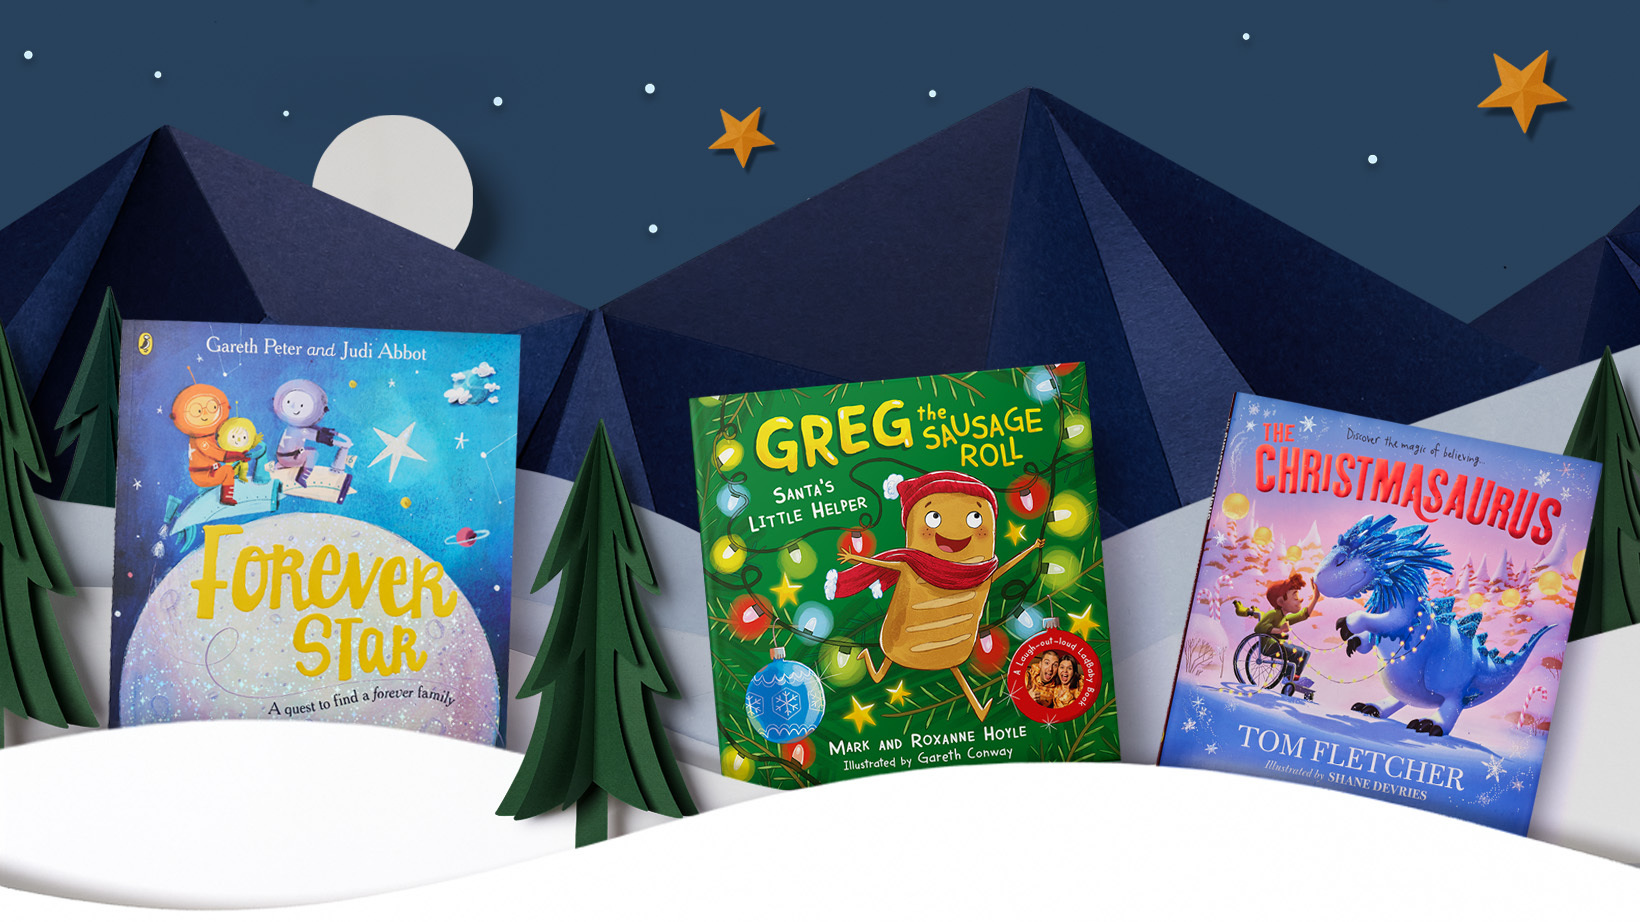 A photo of five books for under 5s that will make great gifts for children. The books are on a dark blue background with mountains, snow and stars